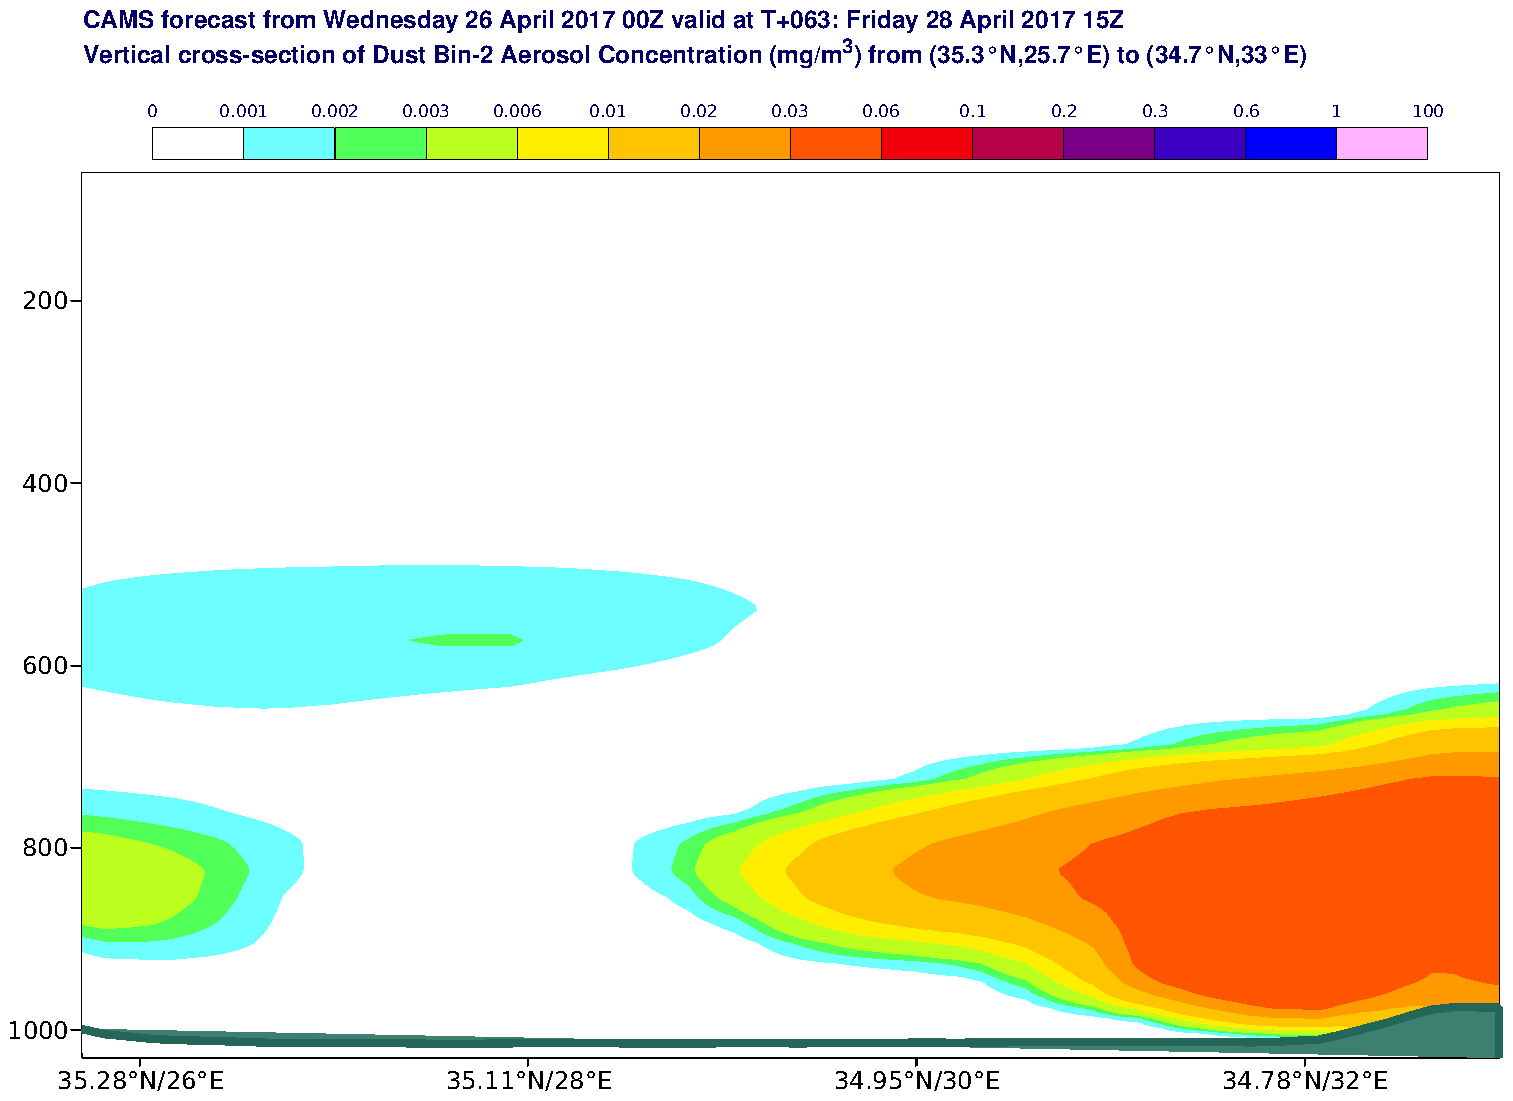 Vertical cross-section of Dust Bin-2 Aerosol Concentration (mg/m3) valid at T63 - 2017-04-28 15:00